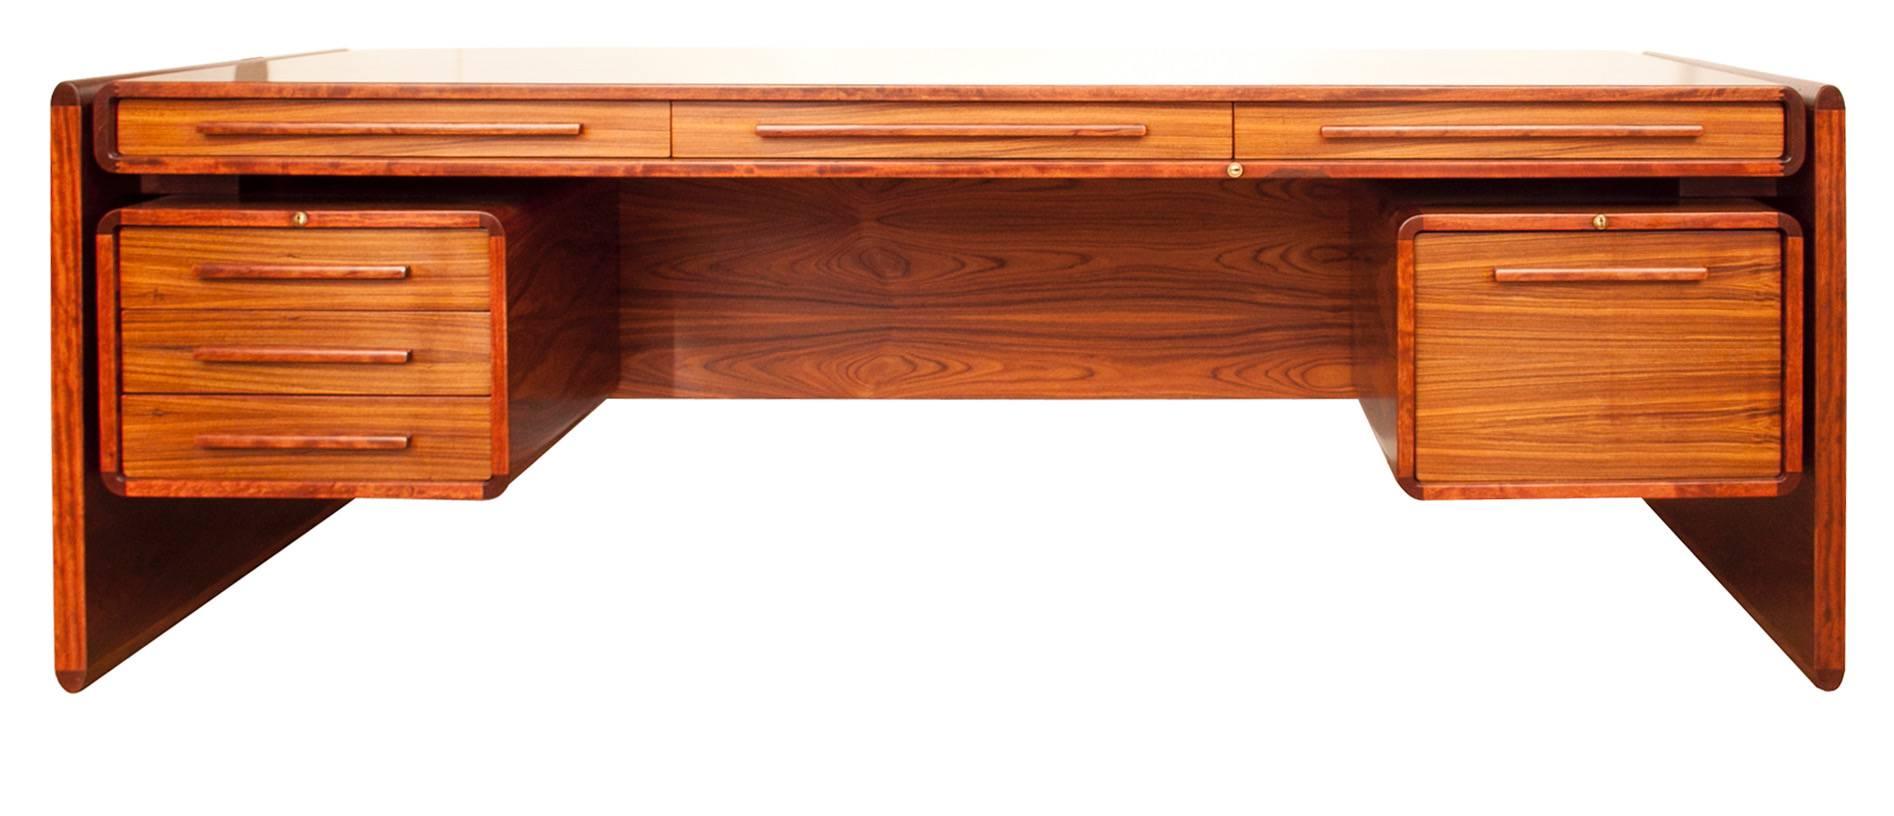 Mid-Century Modern Design.
Mid-Century rosewood desk designed by Svend Dyrlund
Mid-Century design at its very best designed and produced by Svend Dyrlund.
An impressive Mid-Century rosewood desk the central top section containing three flat drawers